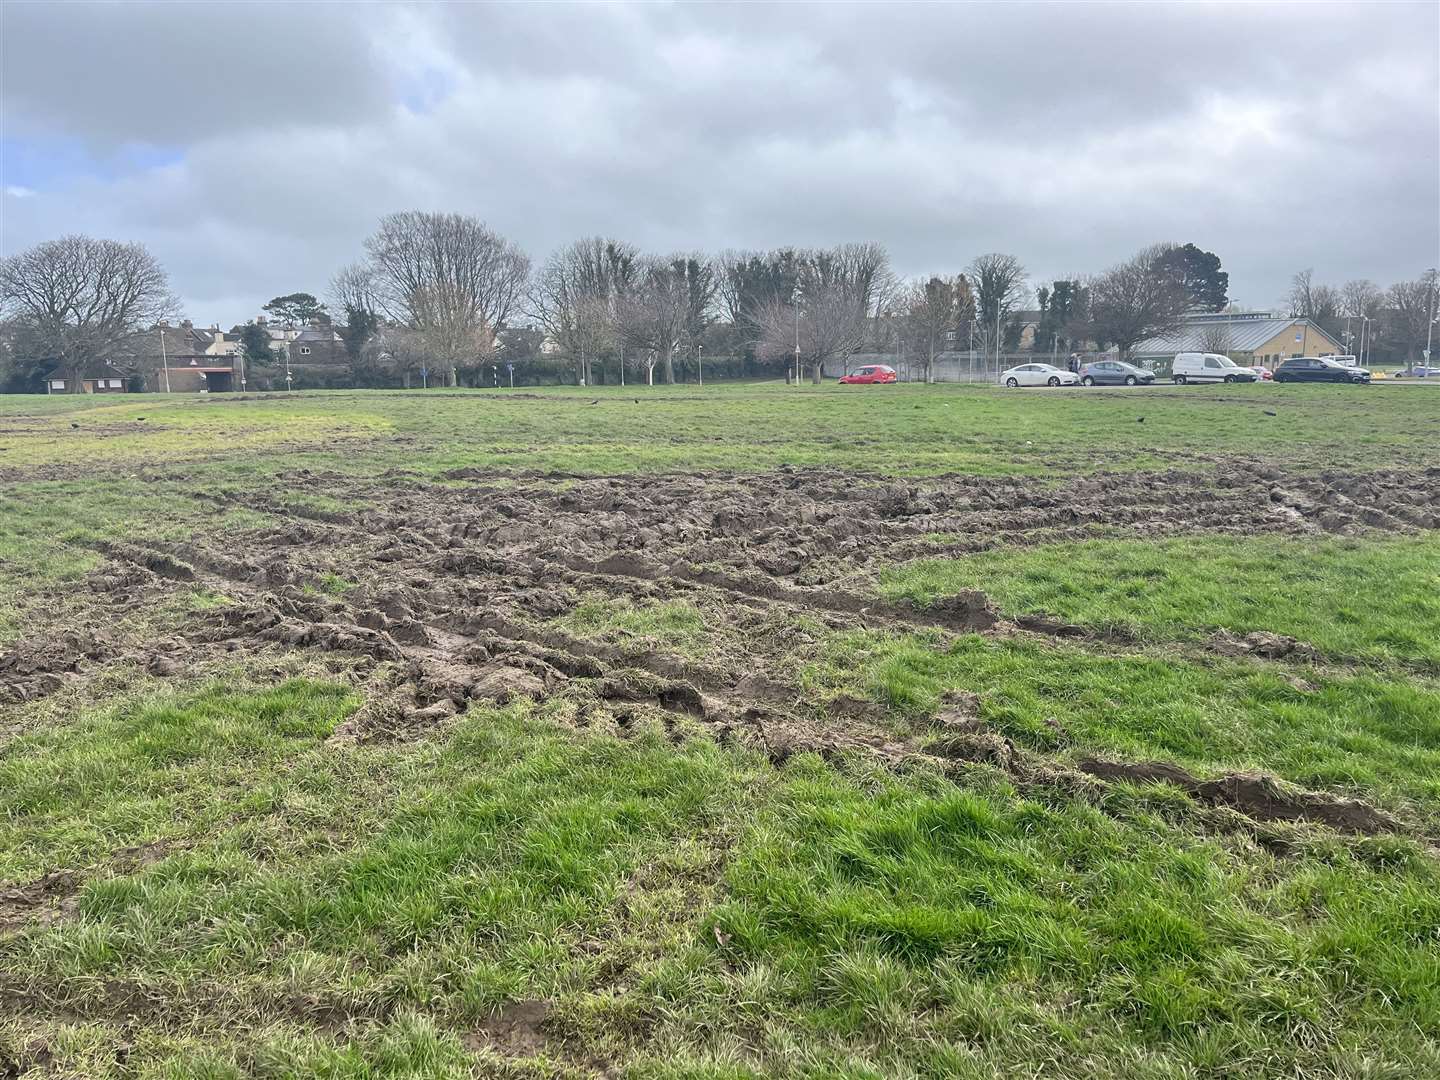 Victoria Park in Deal has been left in a "terrible mess" according to residents